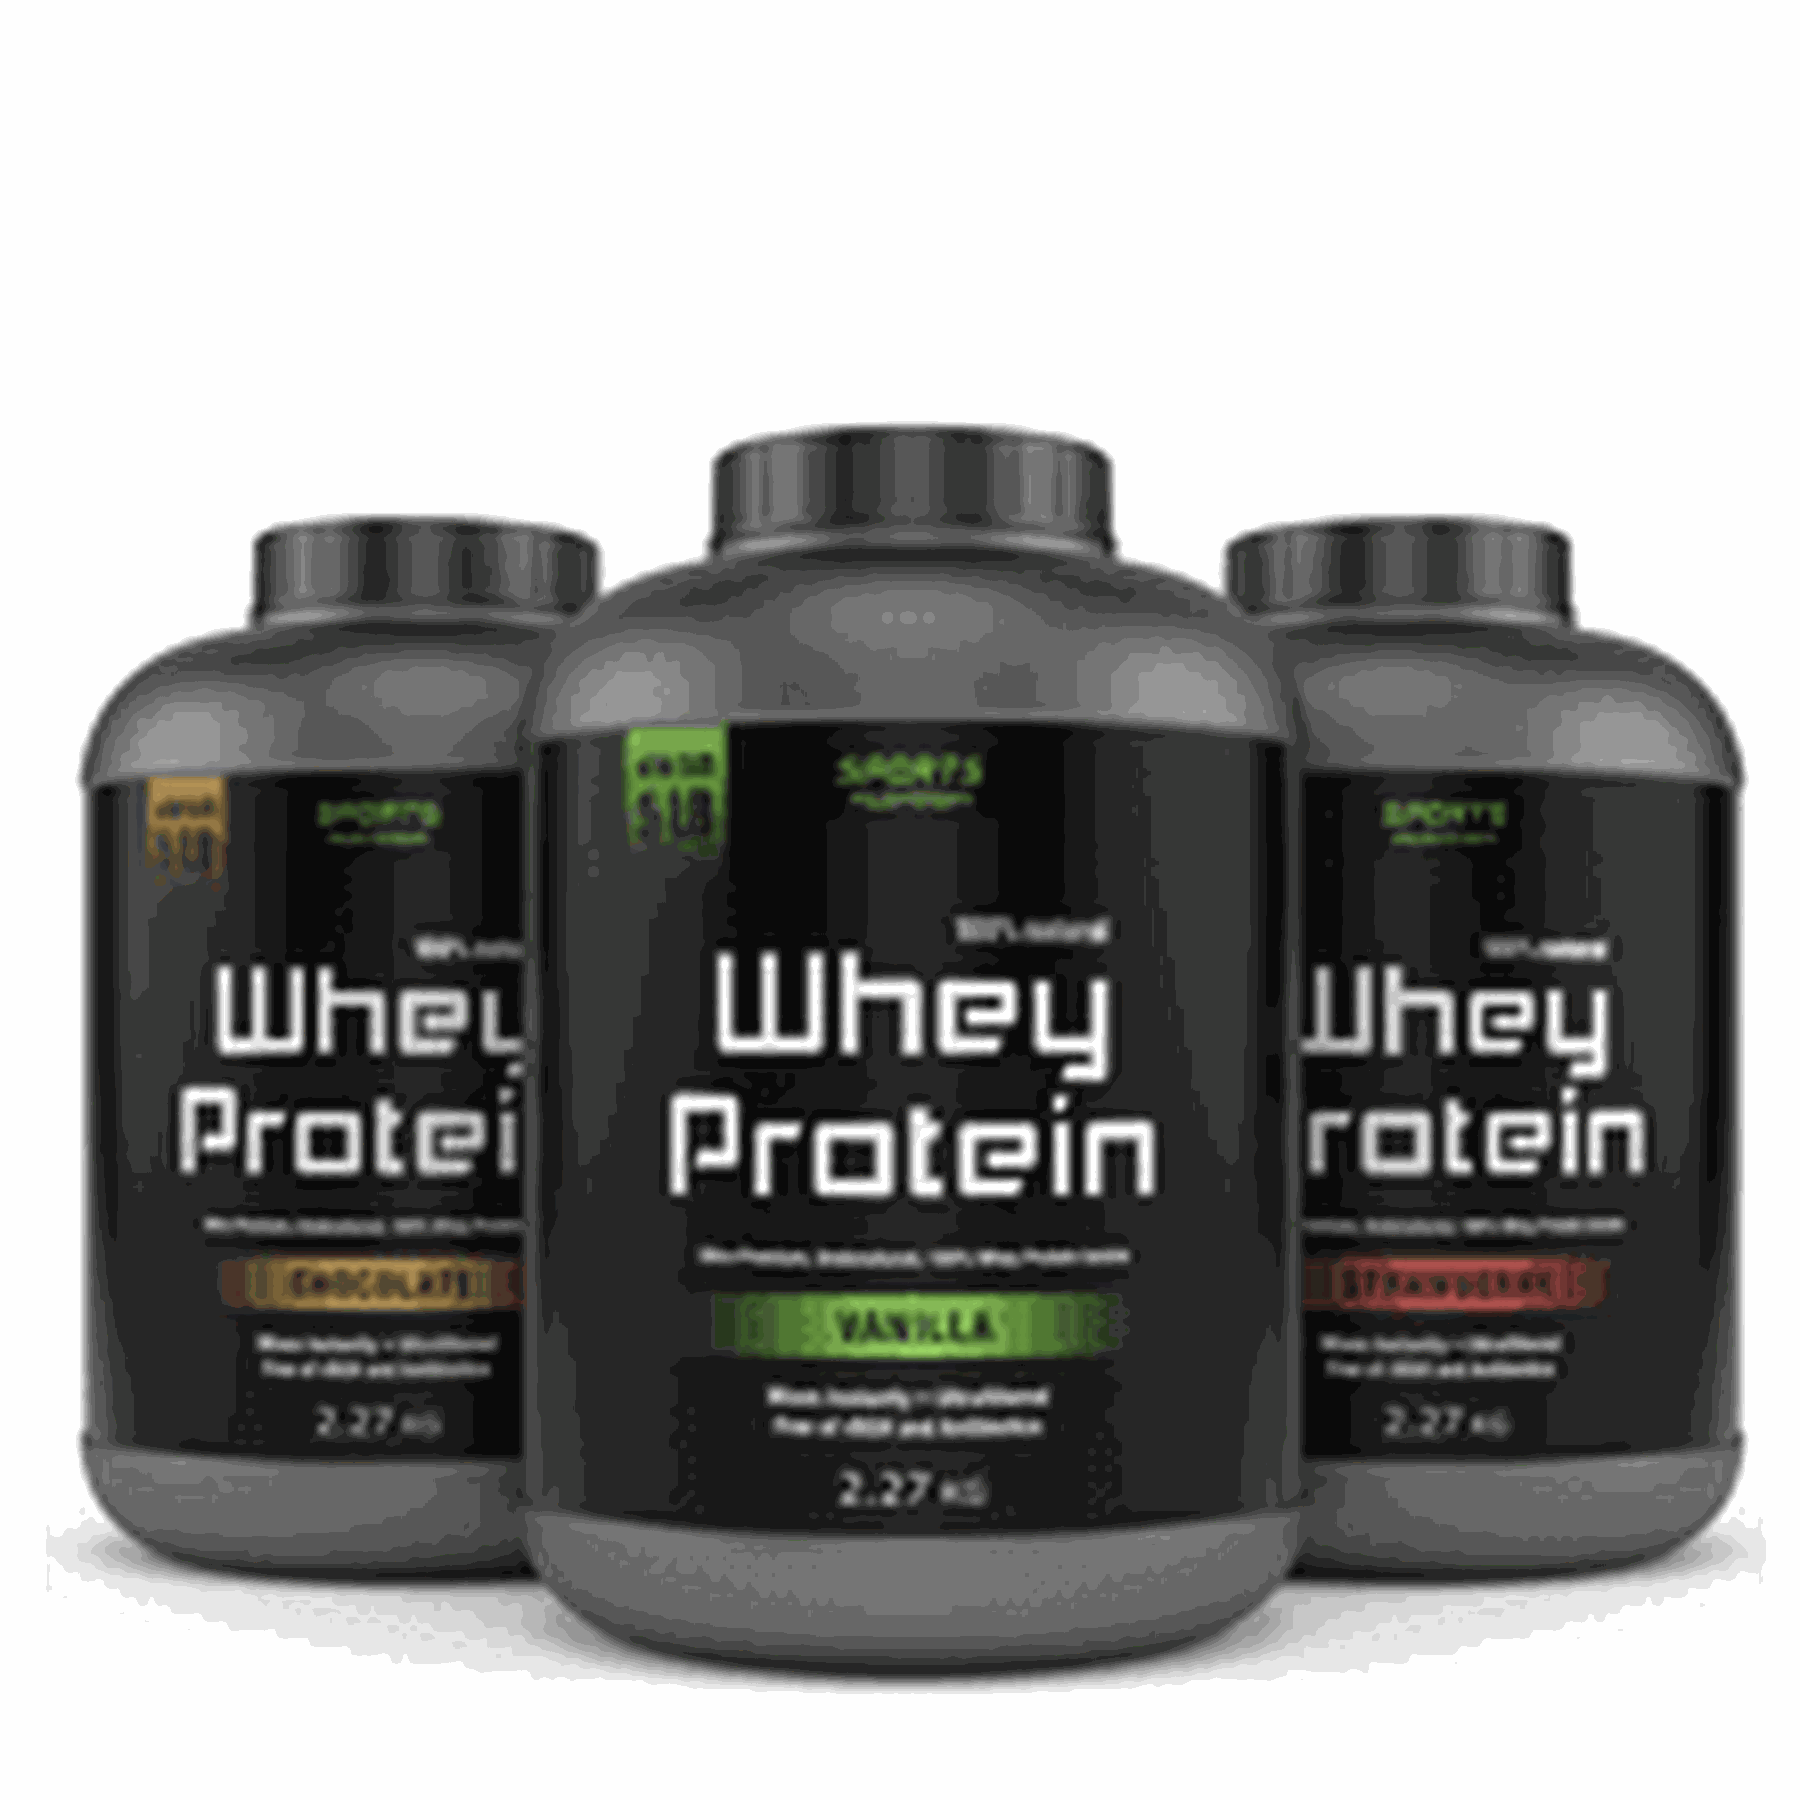 Buy proteins during the sale season